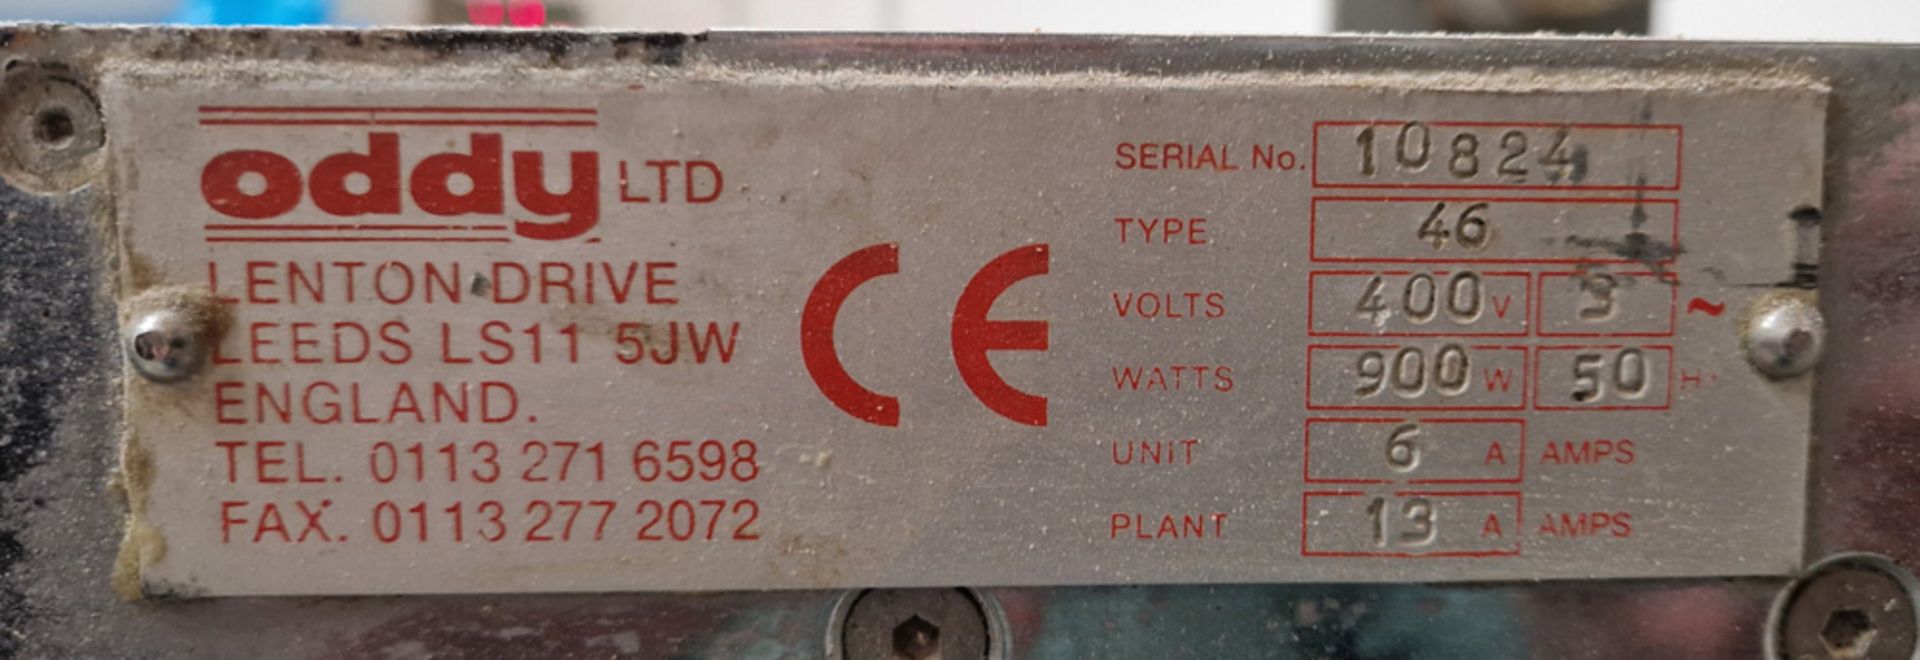 An ODDY Type 46 Mobile Conveyor Flour Duster/Seeder, Serial No. 10824 (400V) (NOTE: A Method - Image 2 of 2